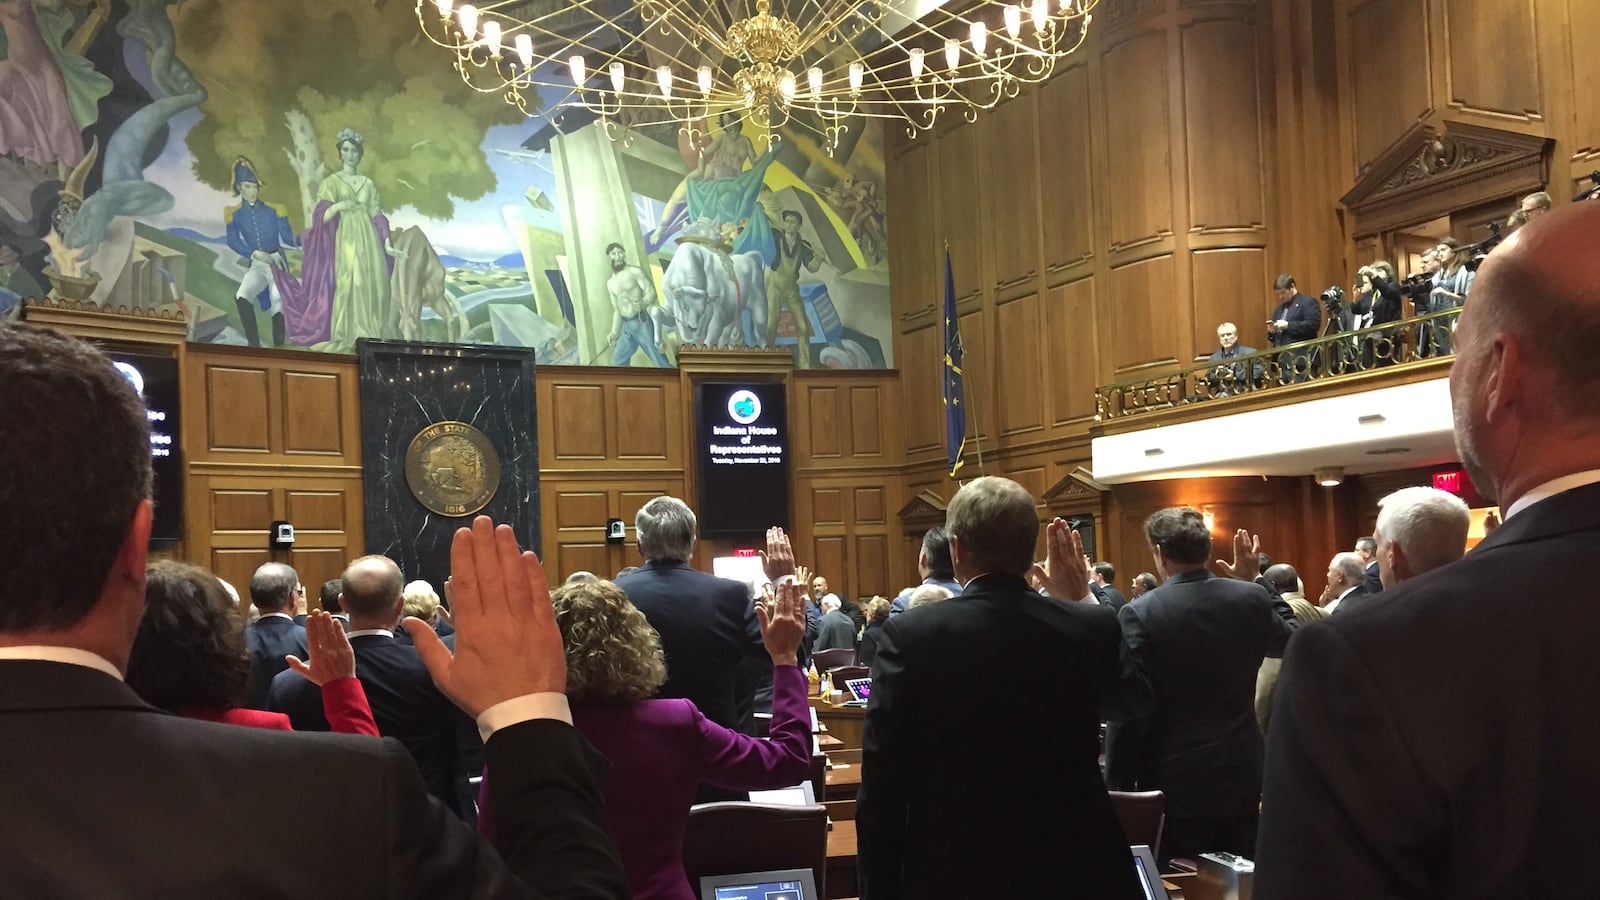 Indiana House Speaker Brian Bosma, R-Indianapolis, (right) and Rep. Todd Huston, R-Fishers, take the oath of office along with the rest of the House members during the annual Organization Day session to officially begin the 2017 legislative session.